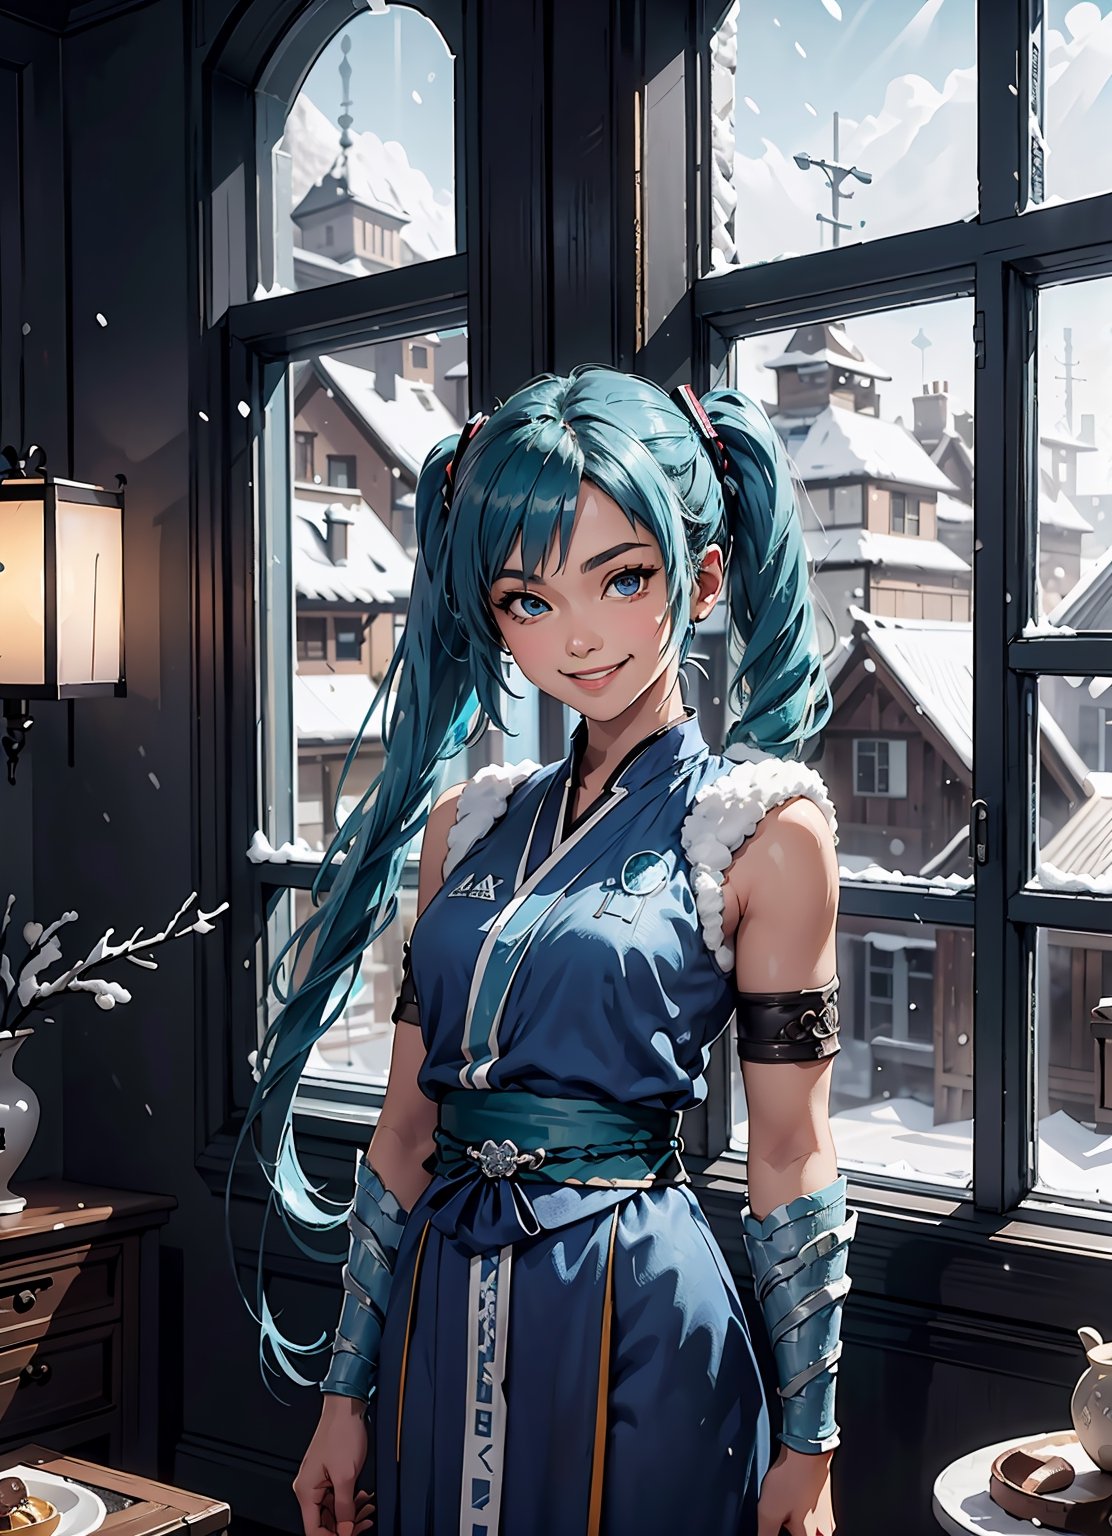 zbzr, hatsune miku, blue twintail hair, blue robes, armor, sash, looking at viewer, smiling, happy, upper body shot, 
standing, inside a cozy living room, playful ambiance, window, snow, winter, extreme detail, masterpiece,  
